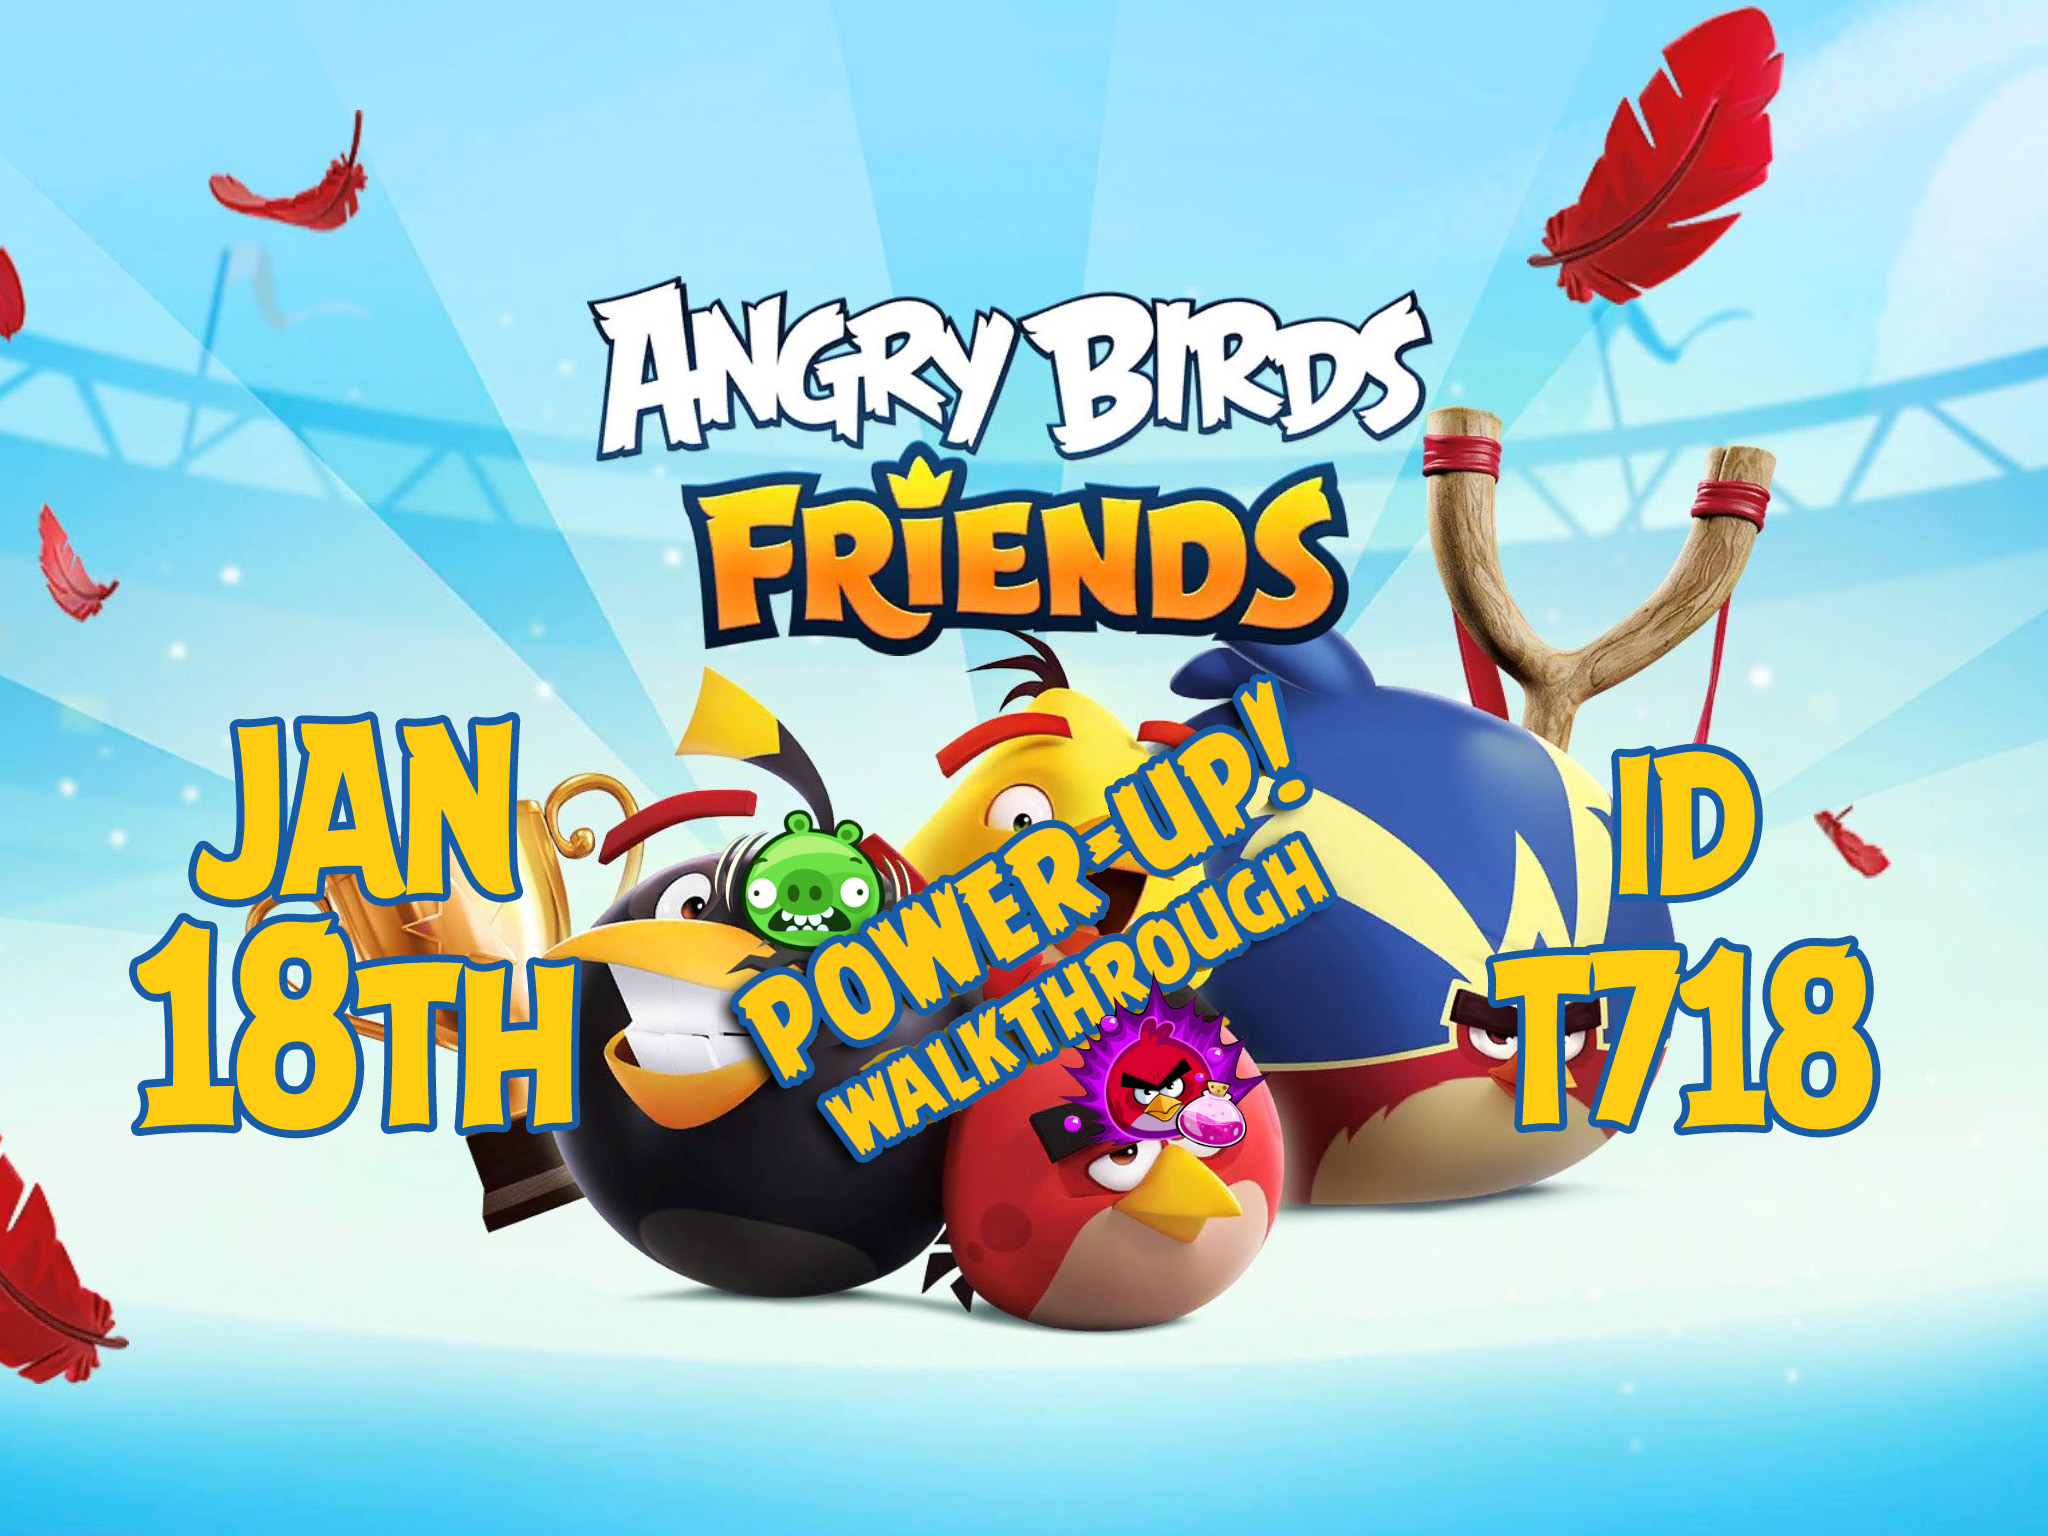 Angry-Birds-Friends-Tournament-T718-Feature-Image-PU